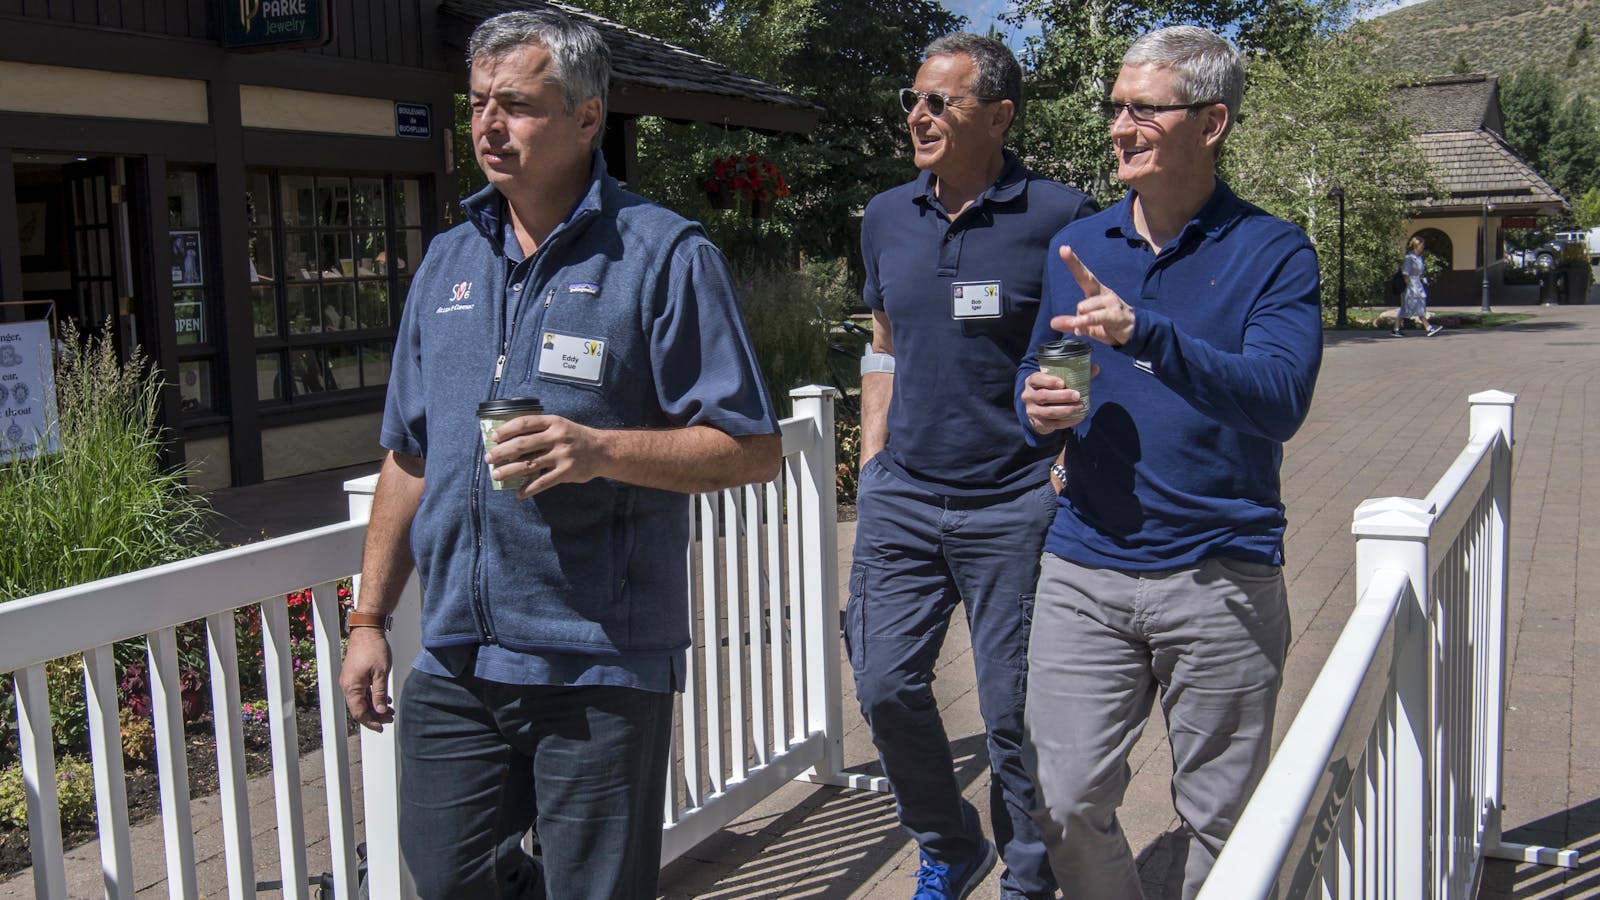 Apple's Eddy Cue, Disney CEO Bob Iger and Apple CEO Tim Cook at Sun Valley in Idaho. Photo by Bloomberg.